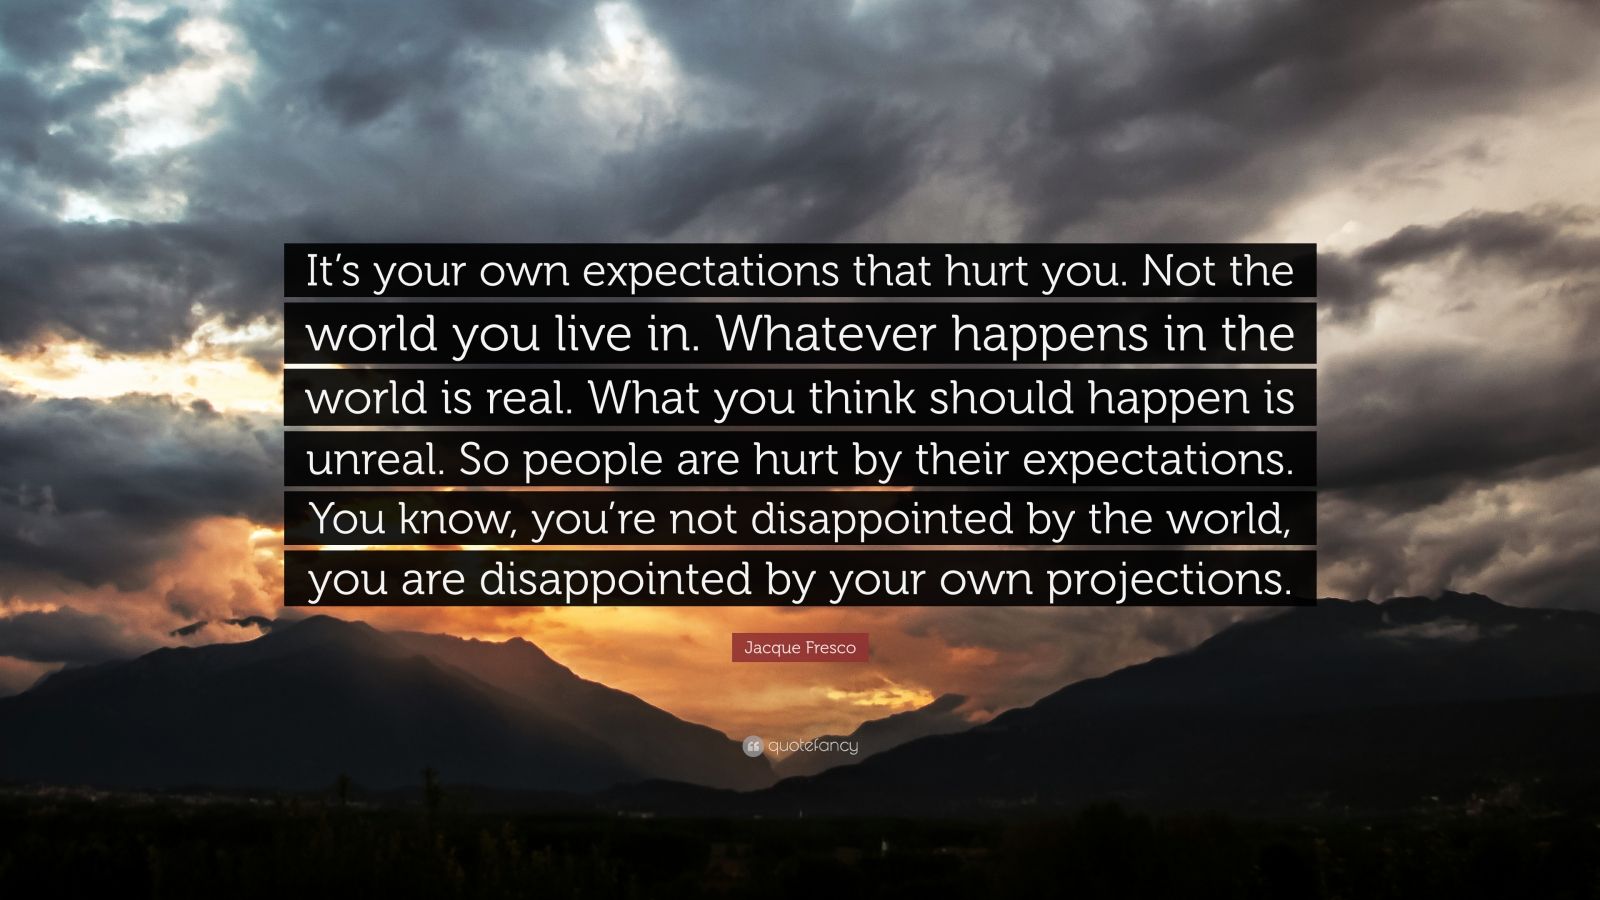 Jacque Fresco Quote: “It's your own expectations that hurt you ...